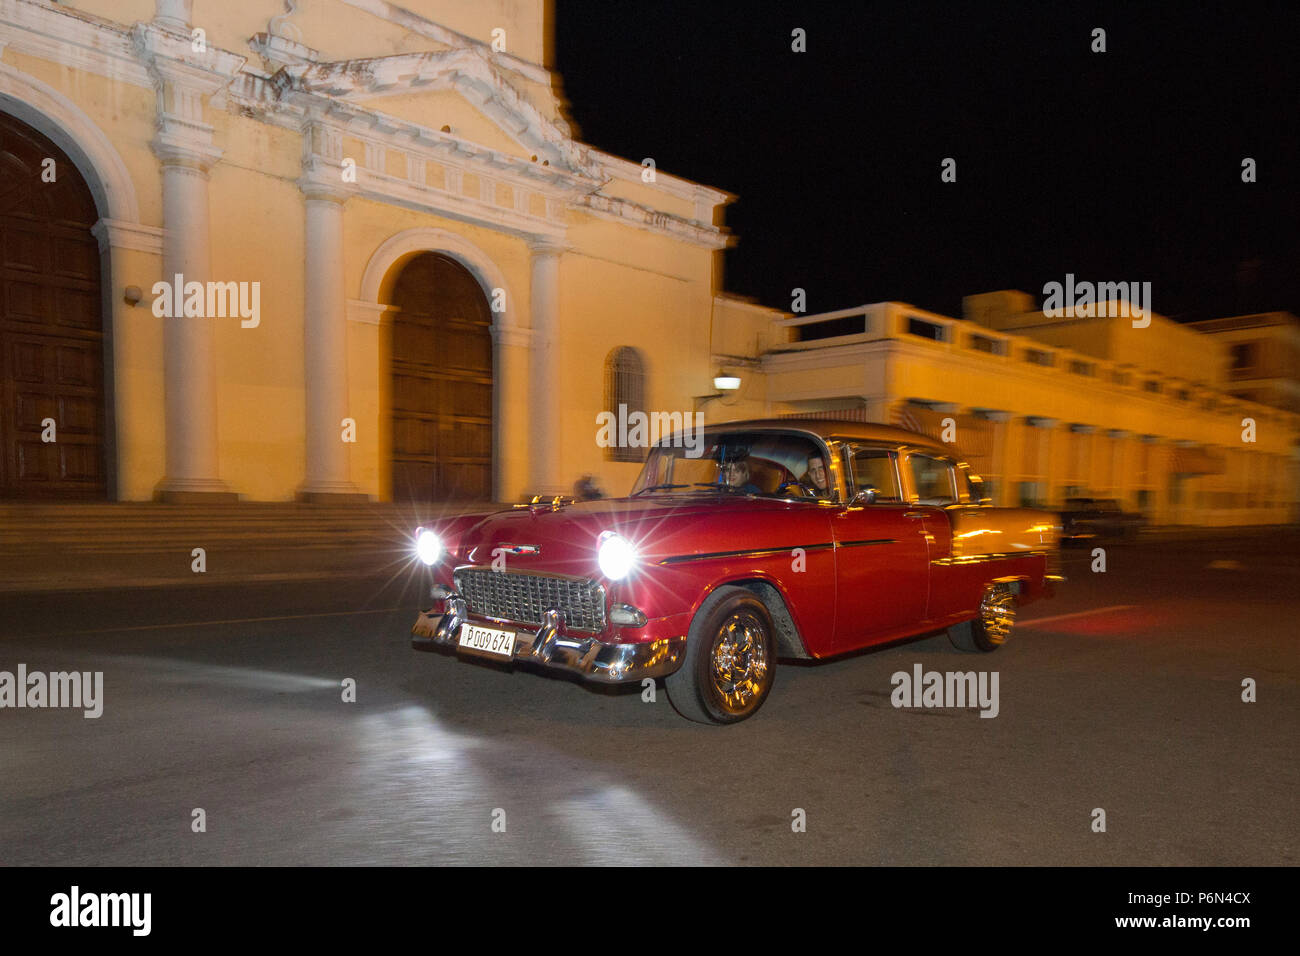 Classic 1955 Chevrolet Bel Air taxi, locally known as 'almendrones' in the town of Cienfuegos, Cuba. Stock Photo